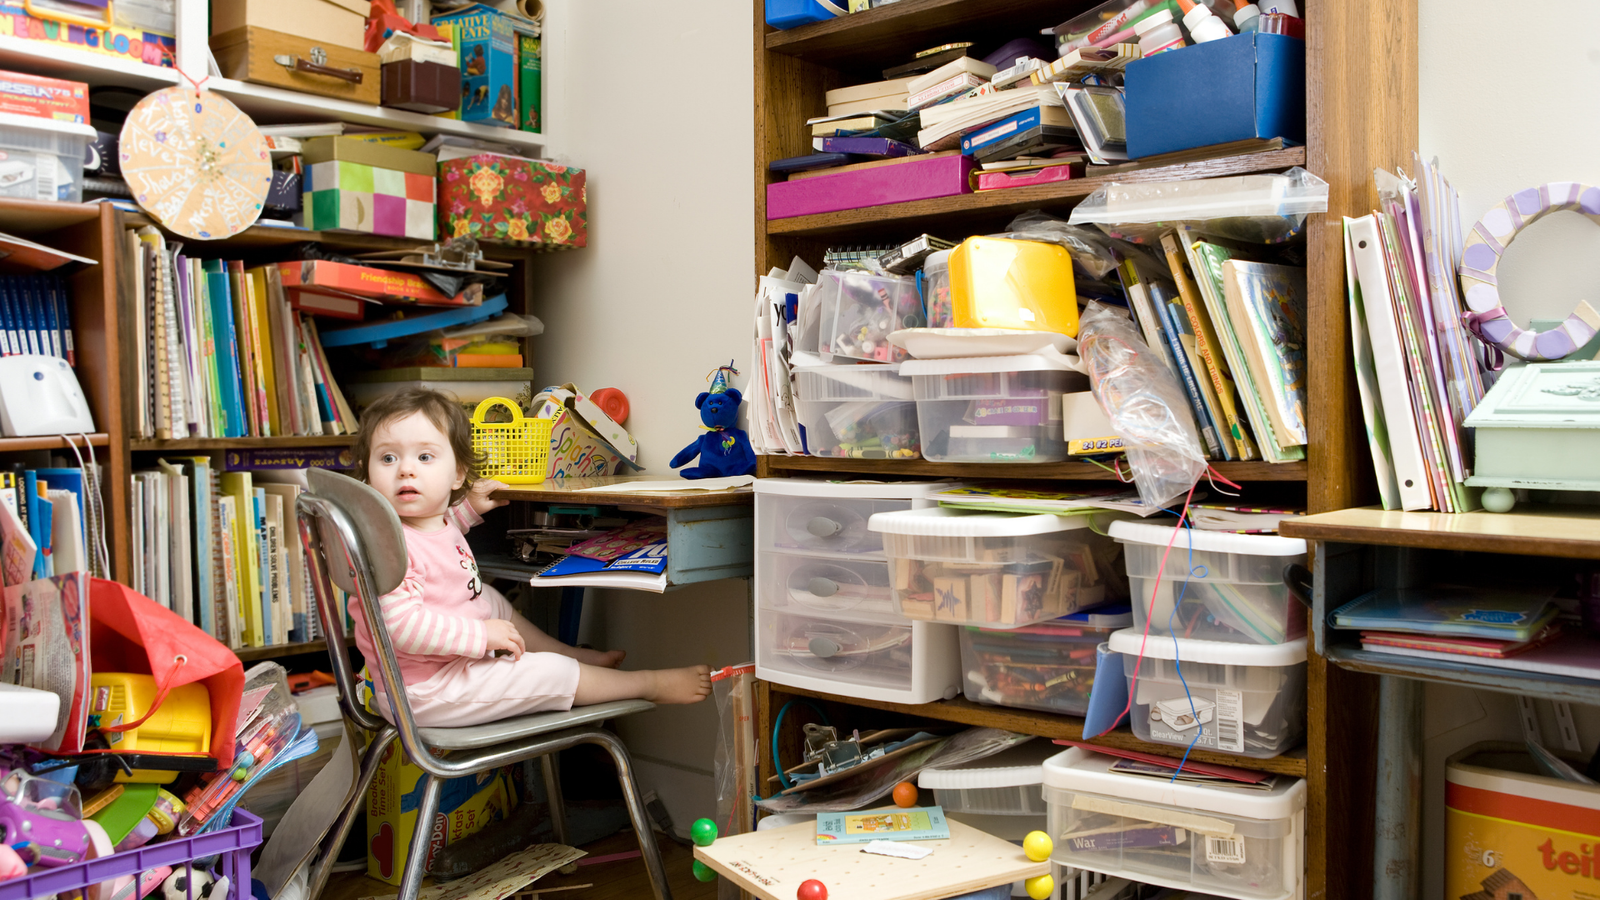 How to Survive Clutter in a One-Room Homeschool